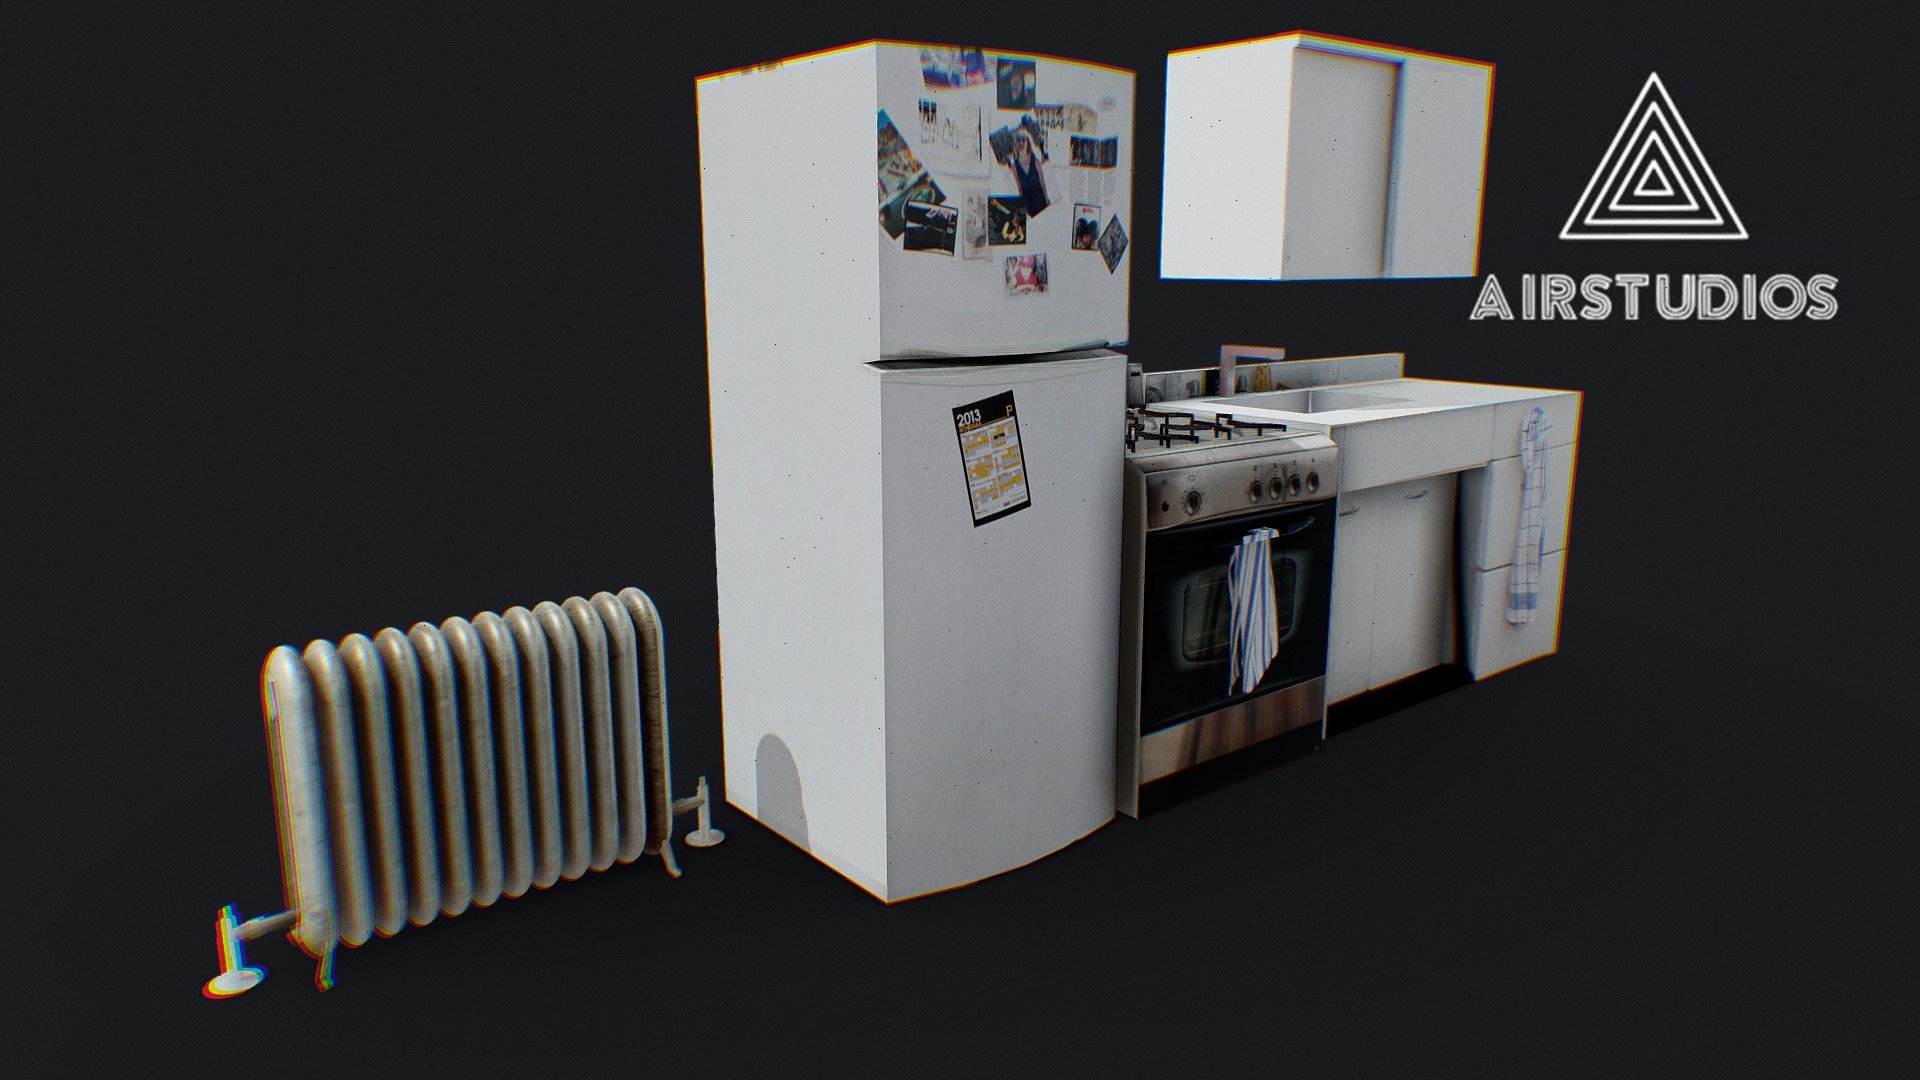 Low Poly Kitchen Assets

Made in Blender - Low Poly Kitchen Assets - Buy Royalty Free 3D model by AirStudios (@sebbe613) 3d model